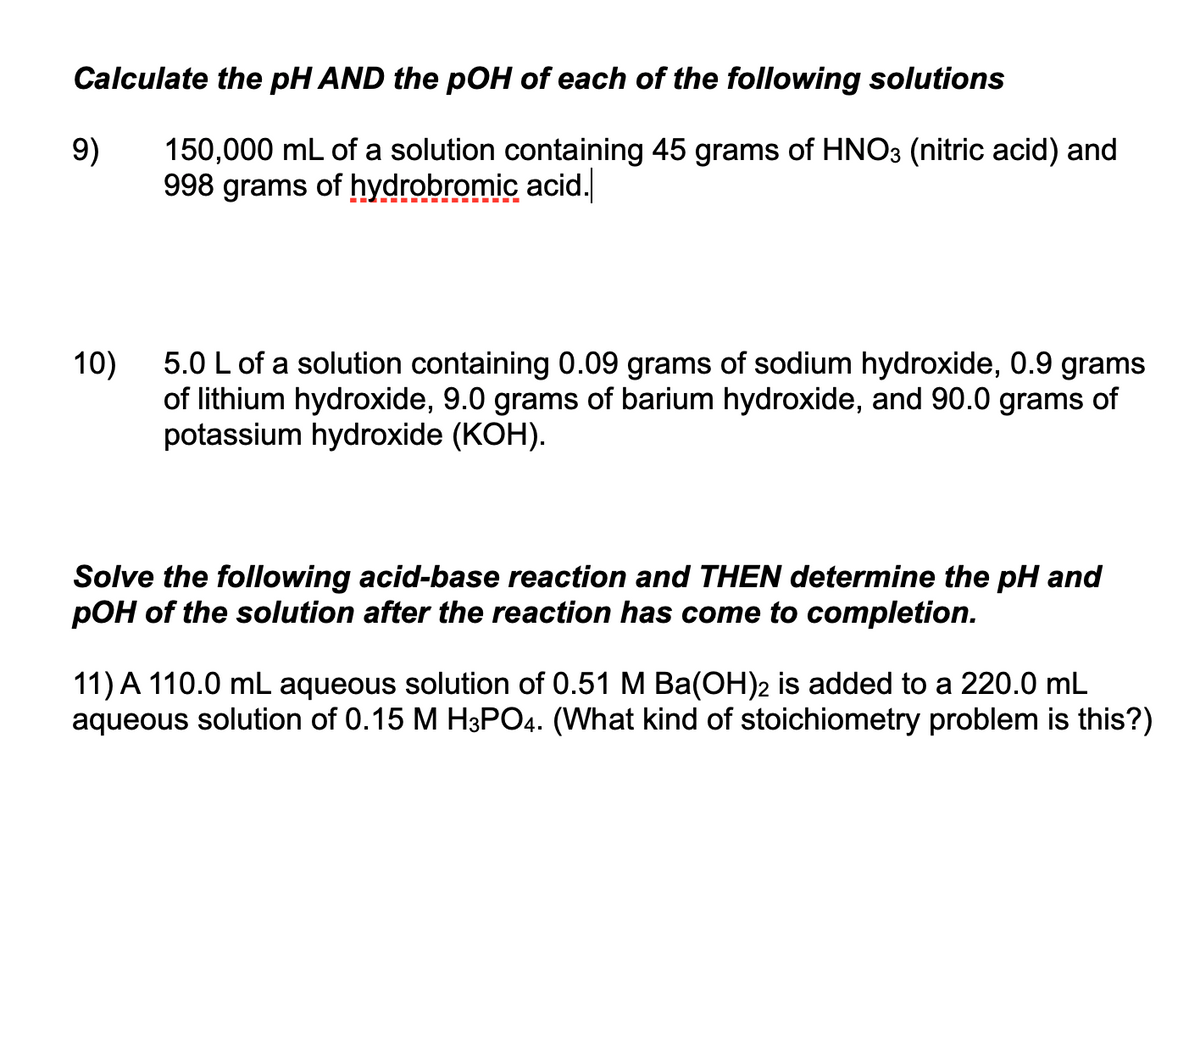 Calculate the pH AND the pOH of each of the following solutions
9)
150,000 mL of a solution containing 45 grams of HNO3 (nitric acid) and
998 grams of hydrobromic acid.
10)
5.0 L of a solution containing 0.09 grams of sodium hydroxide, 0.9 grams
of lithium hydroxide, 9.0 grams of barium hydroxide, and 90.0 grams of
potassium hydroxide (KOH).
Solve the following acid-base reaction and THEN determine the pH and
pOH of the solution after the reaction has come to completion.
11) A 110.0 mL aqueous solution of 0.51 M Ba(OH)2 is added to a 220.0 mL
aqueous solution of 0.15 M H3PO4. (What kind of stoichiometry problem is this?)
